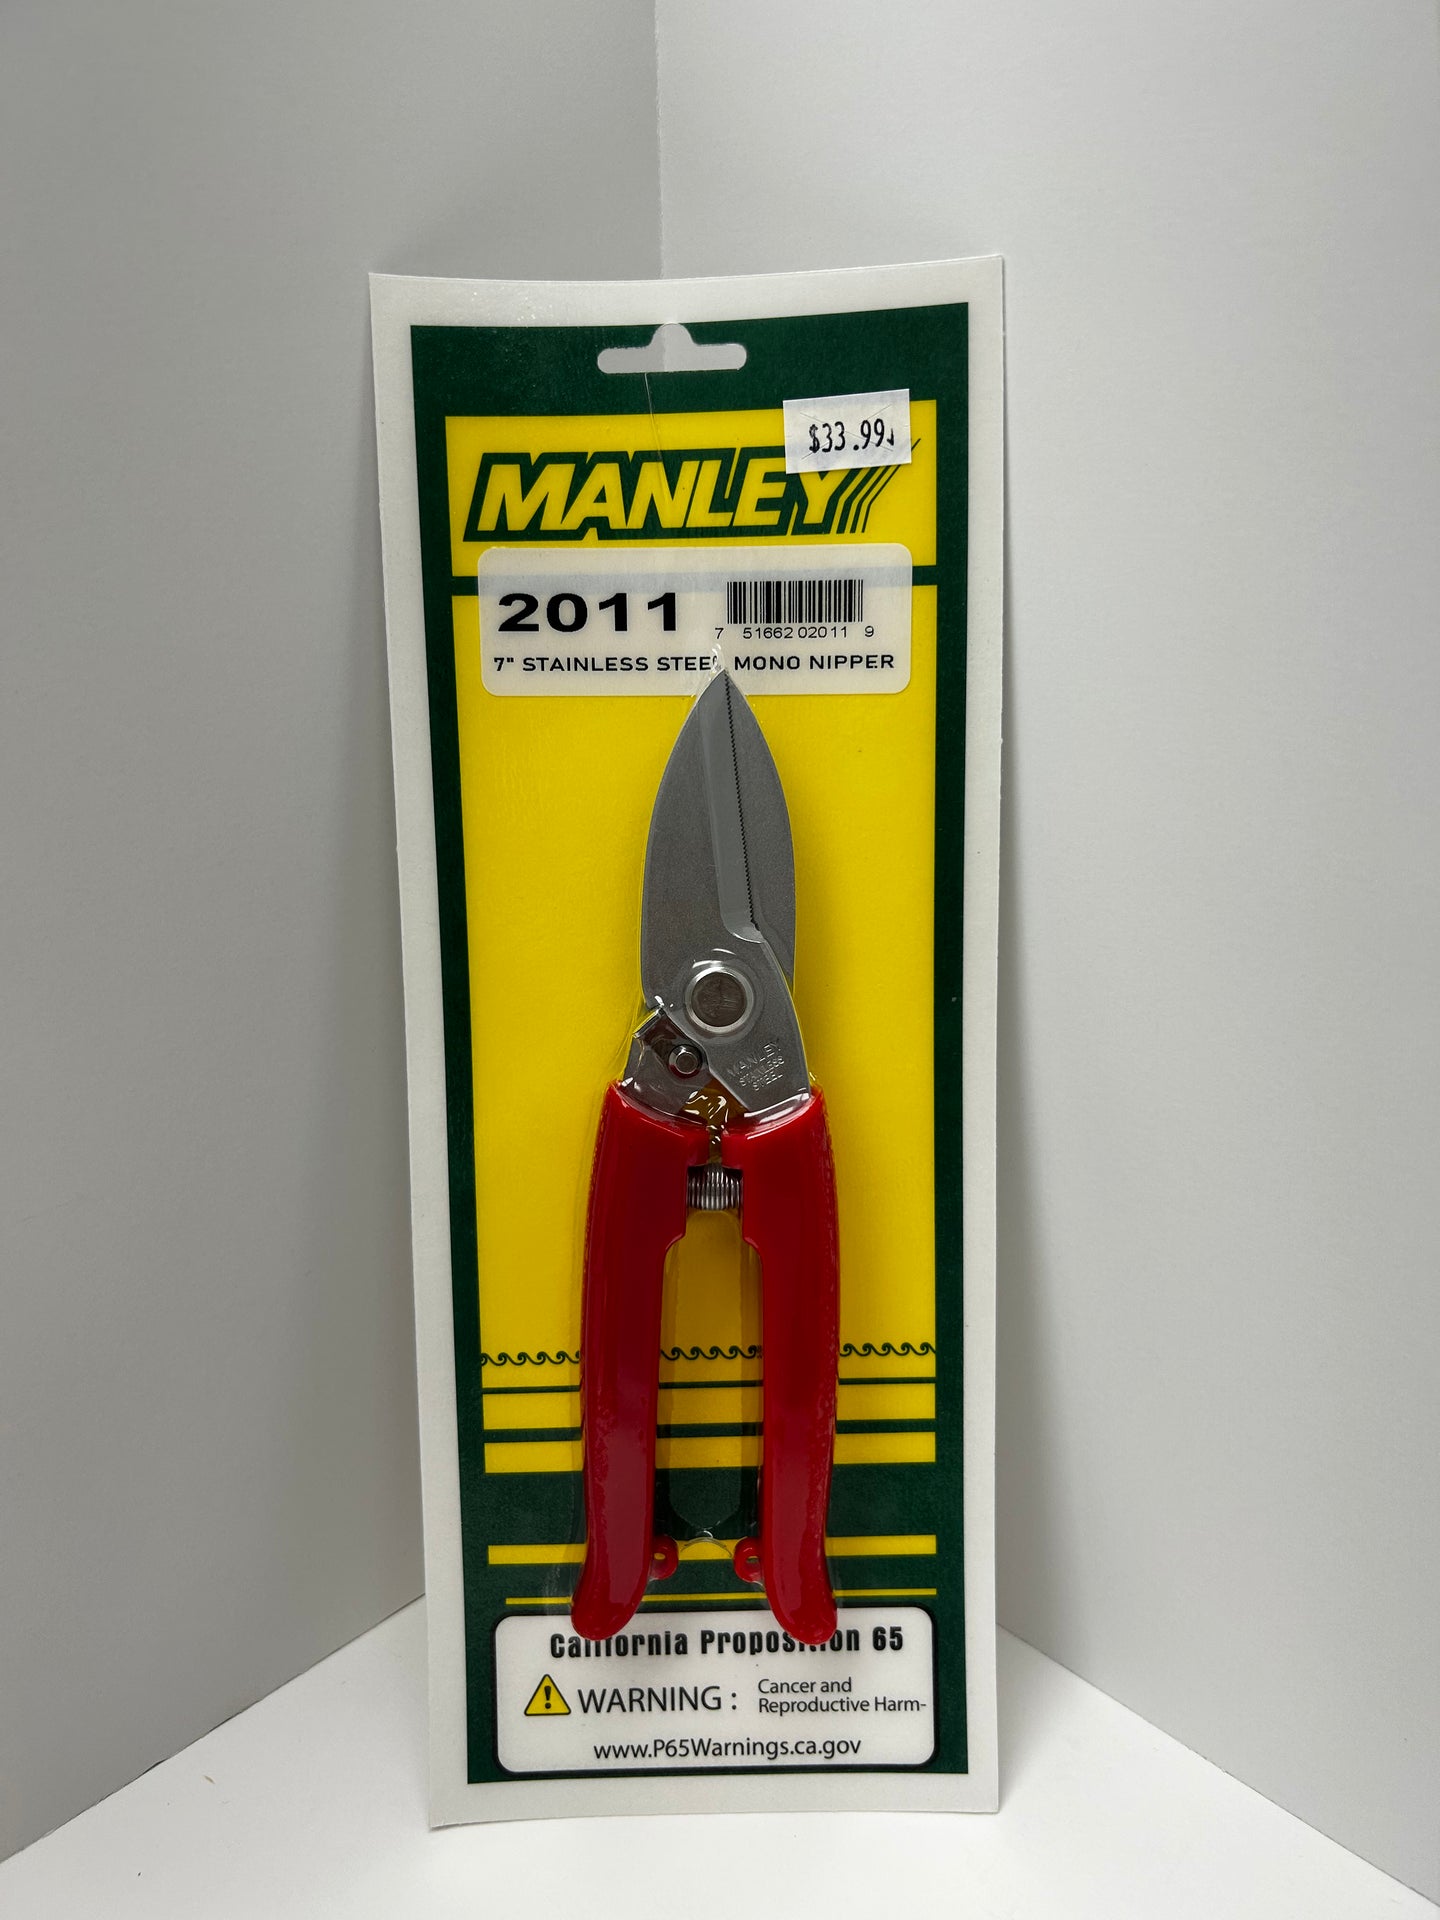 MANLEY 7” Stainless Steel Mono Nipper